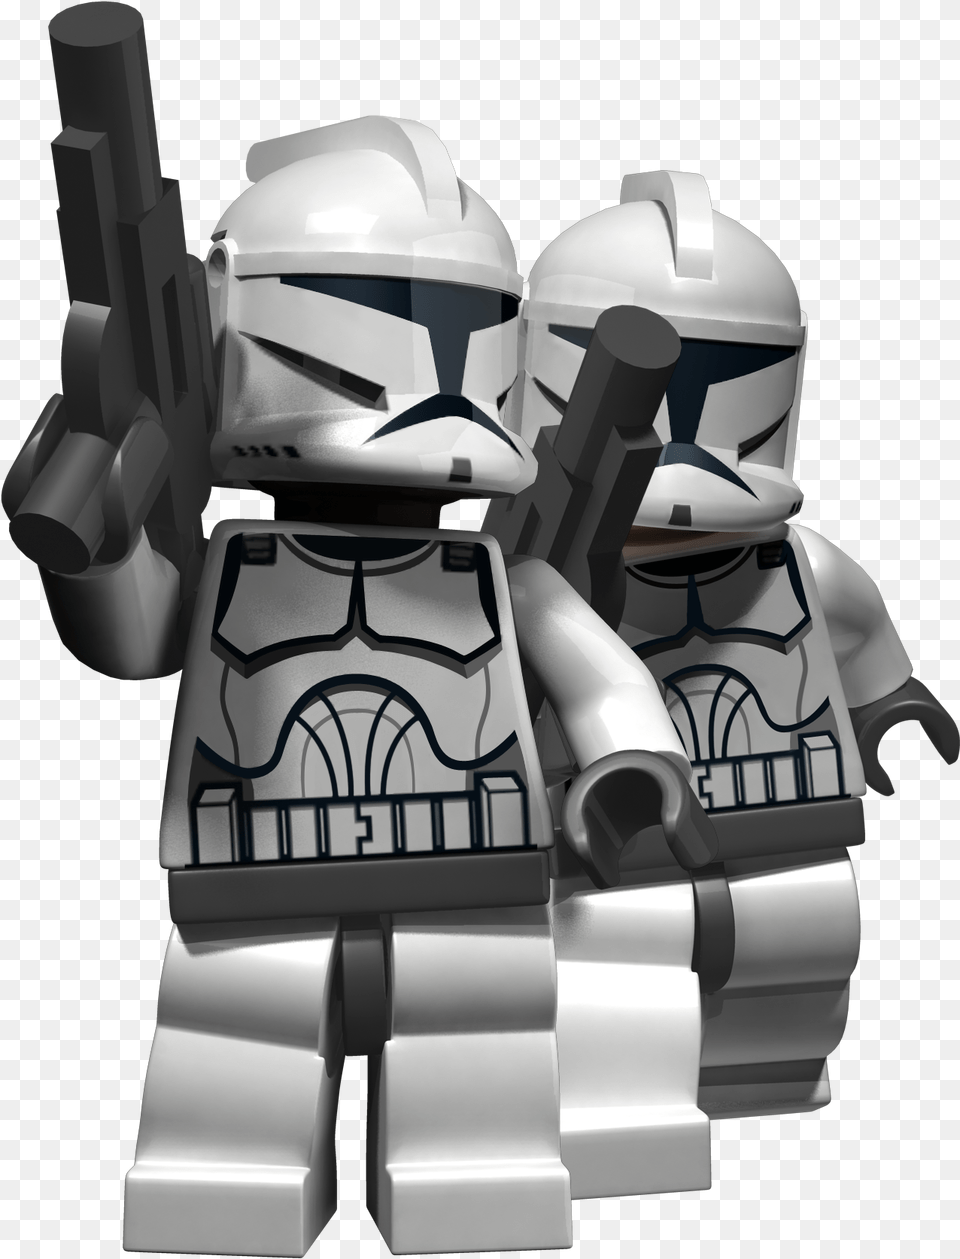 Star Wars Lego Star Wars Game Clone Trooper, Armor, Mailbox Png